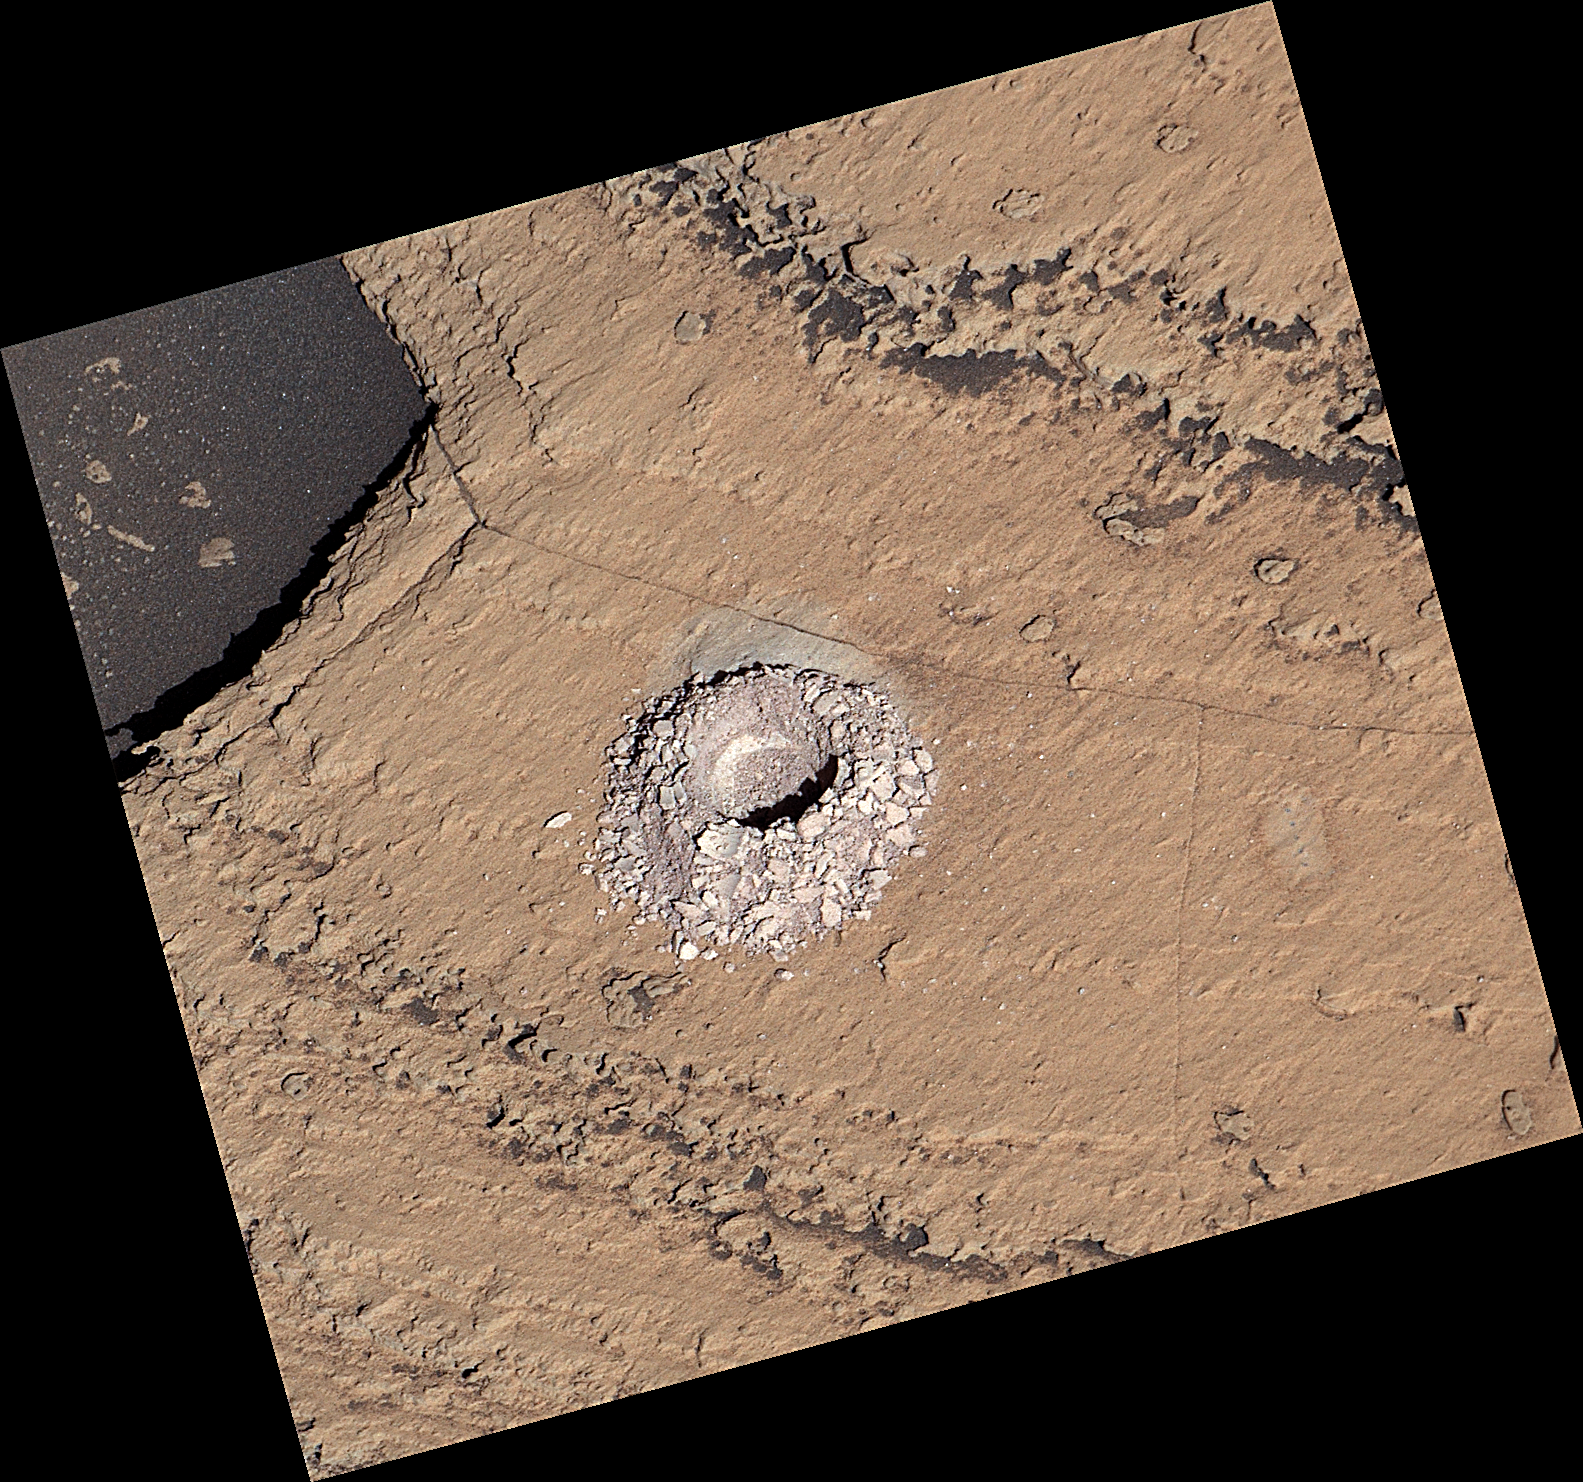 Curiosity Views ‘Sequoia’ Using Its Mastcam: NASA’s Curiosity Mars rover used the drill on the end of its robotic arm to collect a sample from a rock nicknamed “Sequoia” on Oct. 17, 2023, the 3,980th Martian day, or sol, of the mission. The rover’s Mastcam captured this image.